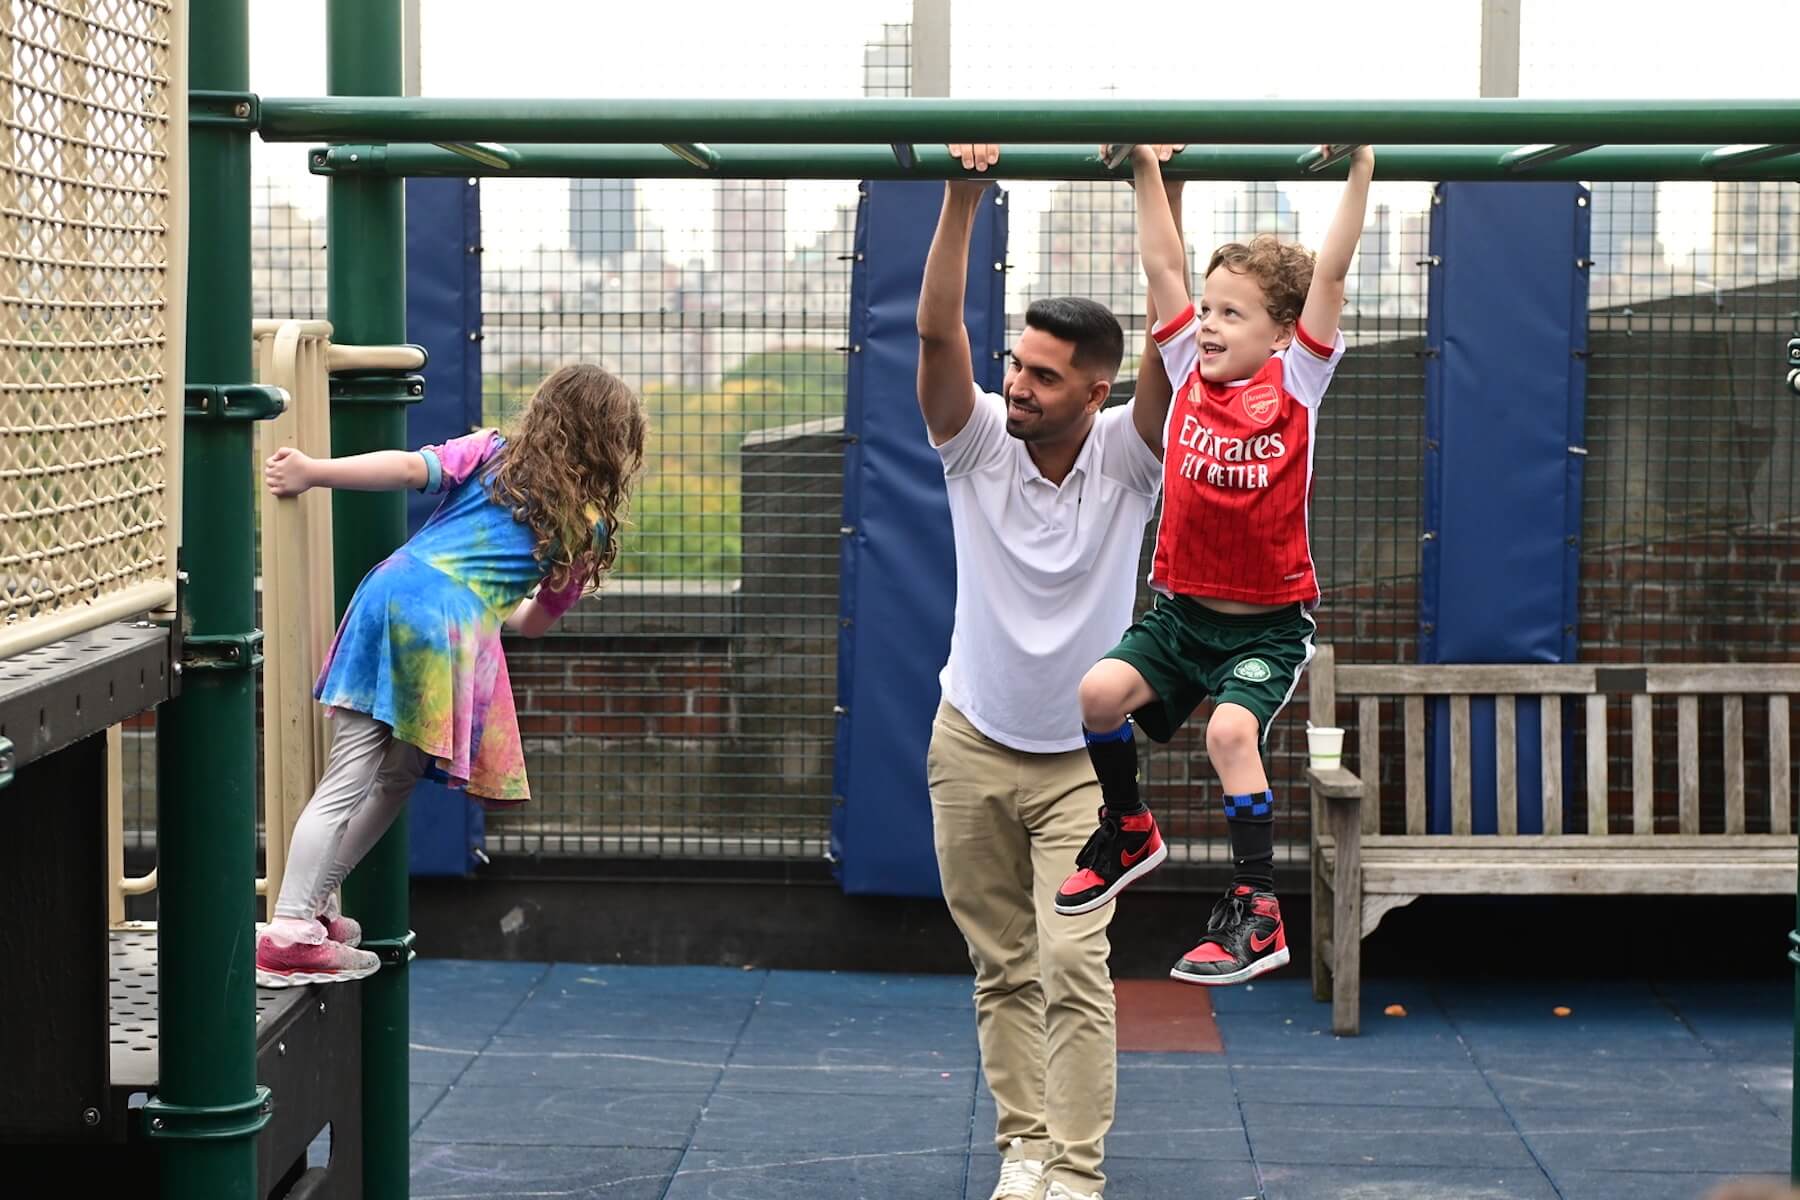 Ethical Culture Fieldston School_Feel Good Photos_Ethical Culture students swing on the playground bars